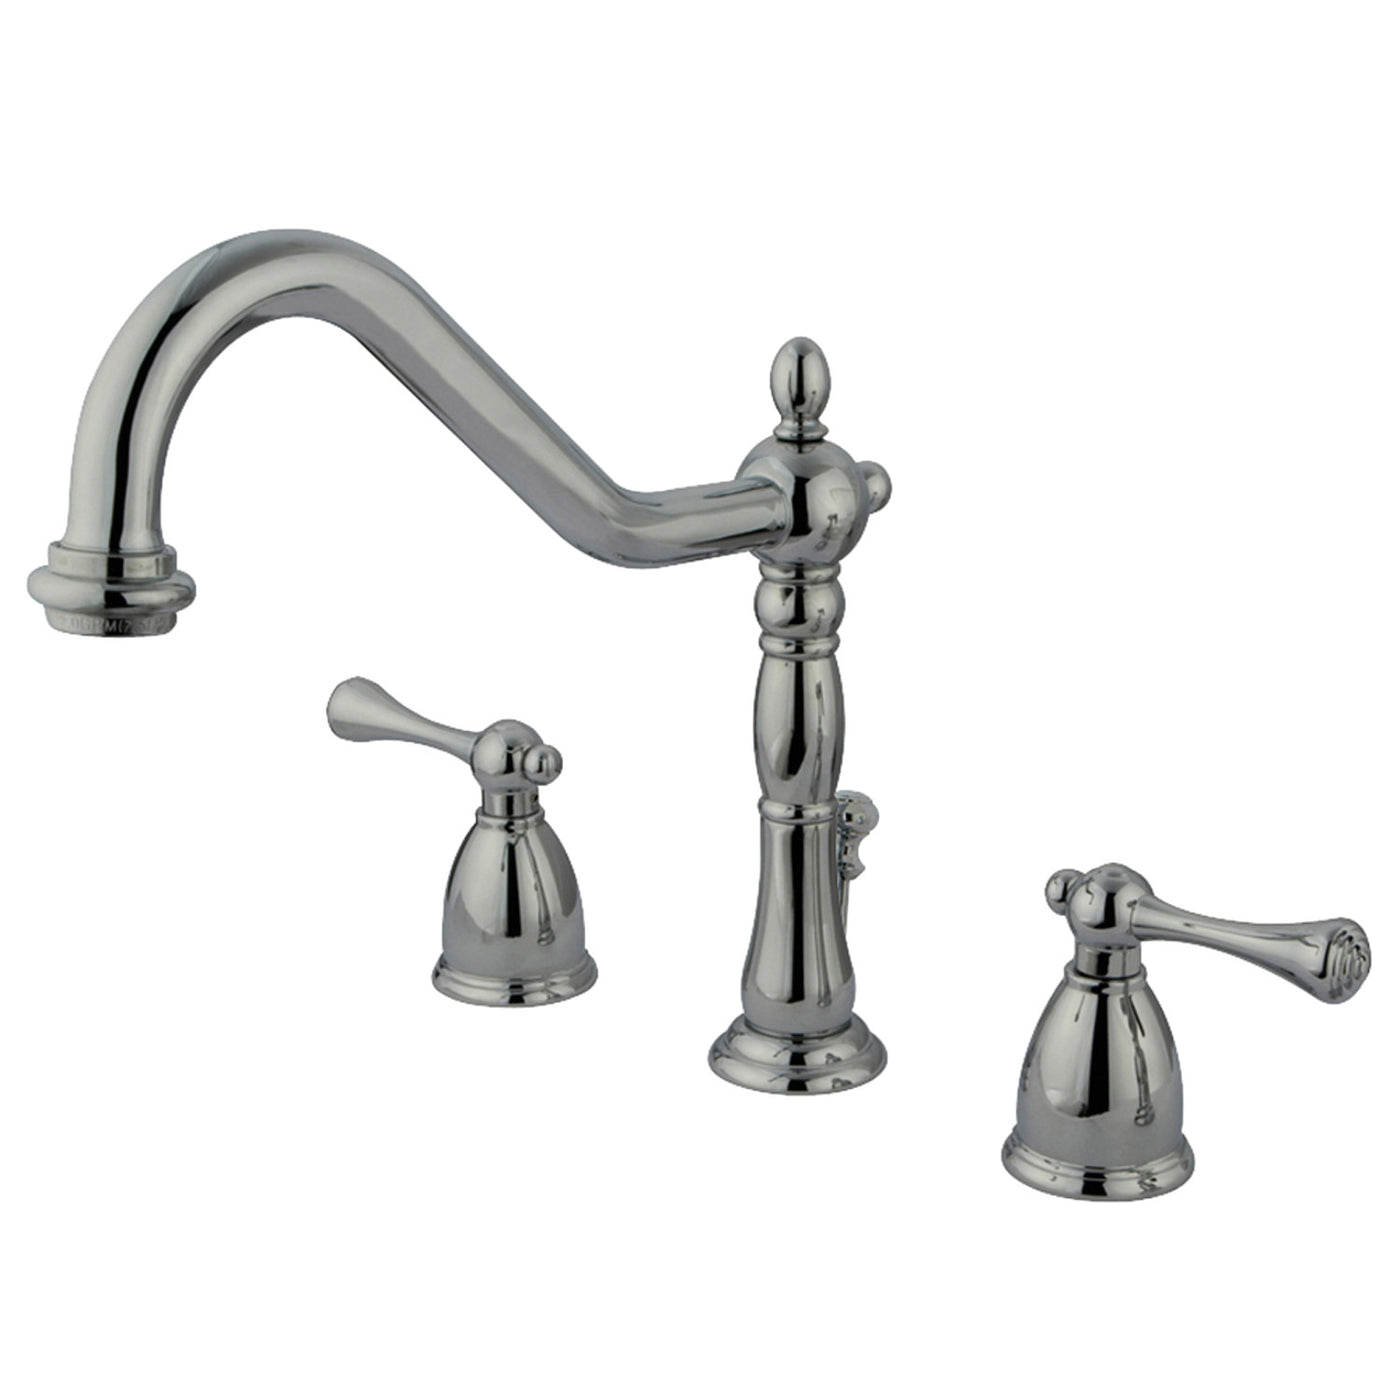 Elements of Design EB7971BL Widespread Bathroom Faucet with Retail Pop-Up, Polished Chrome